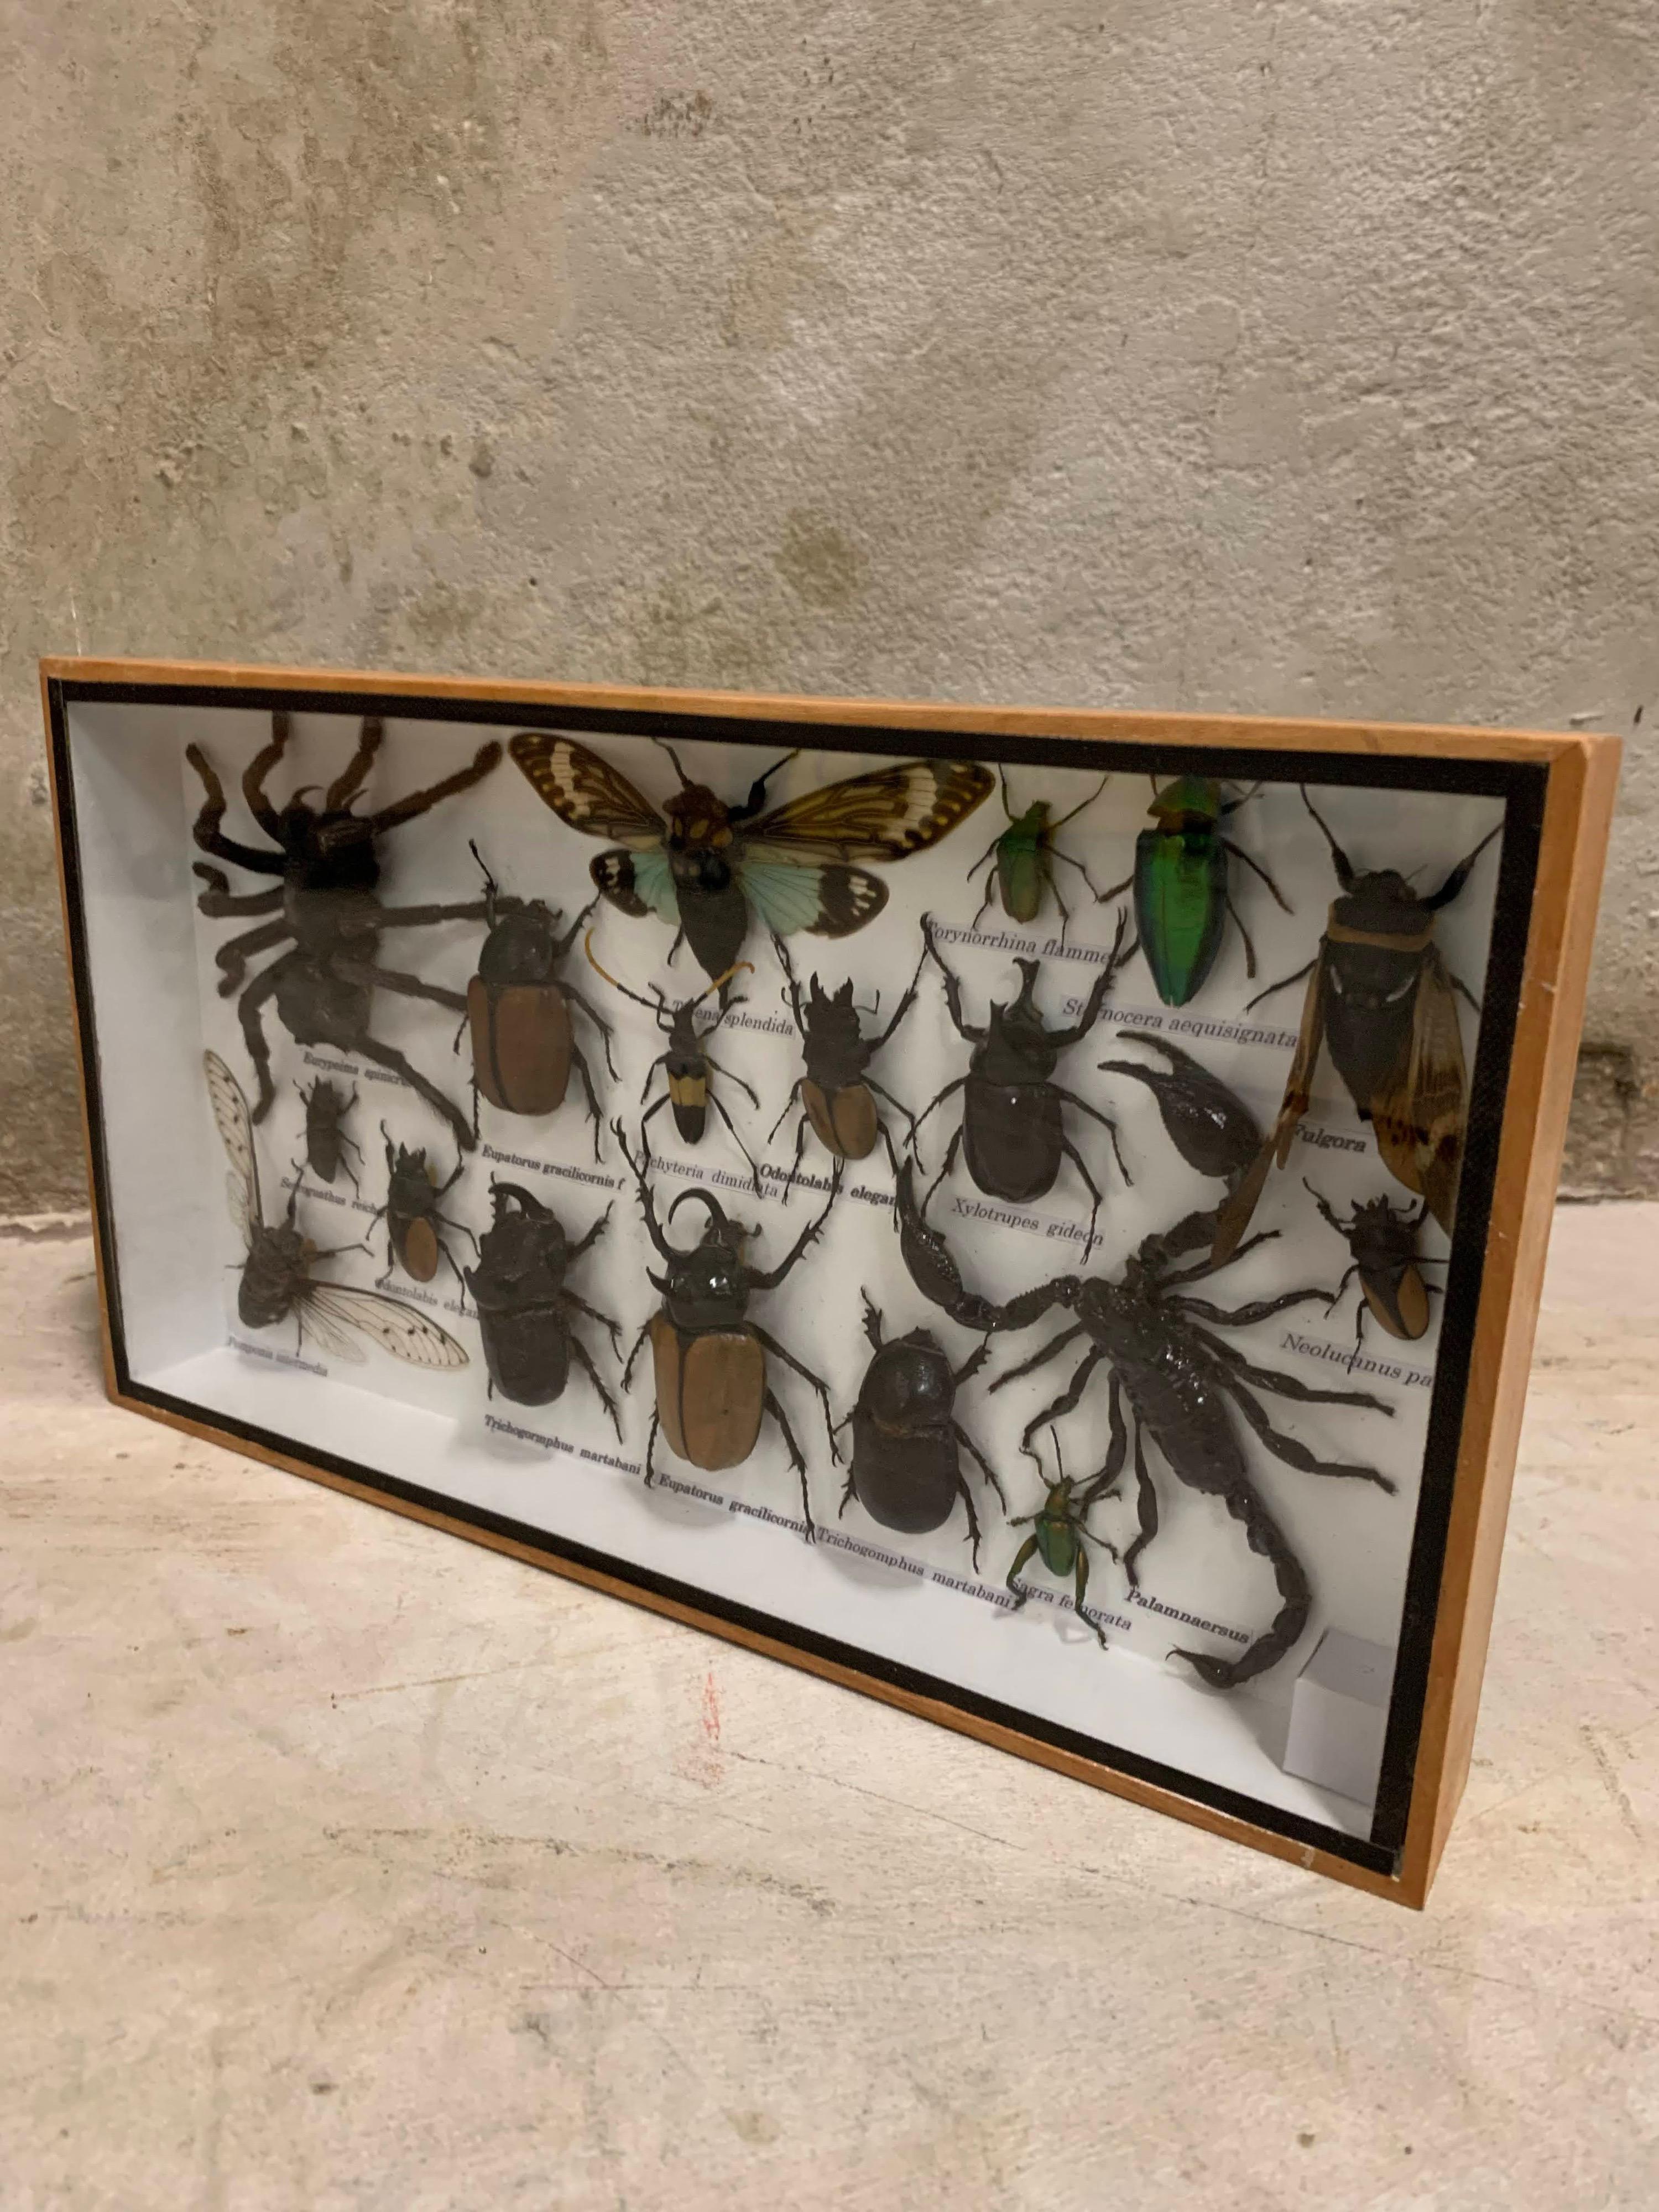 Other Beautiful Wooden Box or Display Case Full of Exotic Insects, Taxidermy